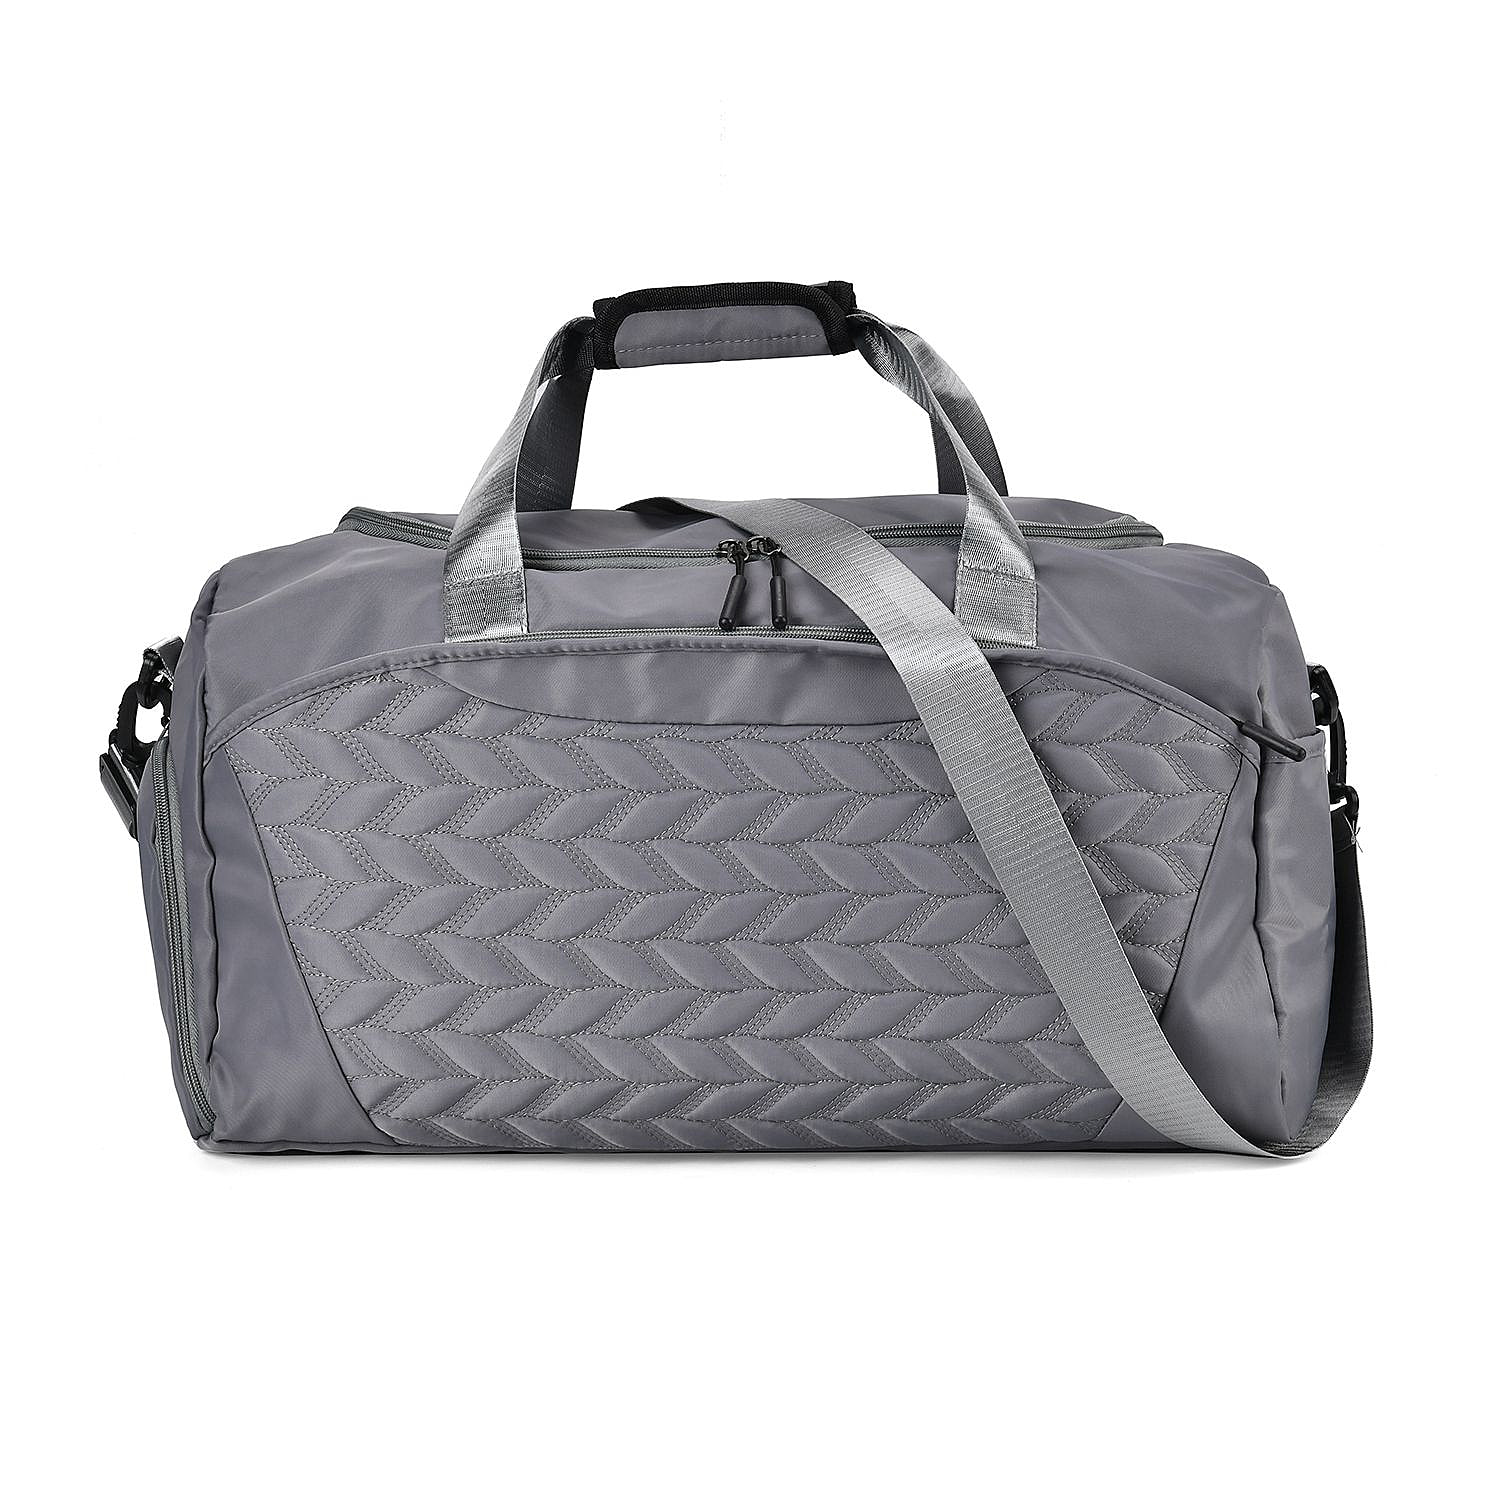 Travel Duffle Bag with Quilted Leaves Pattern - Dark Grey